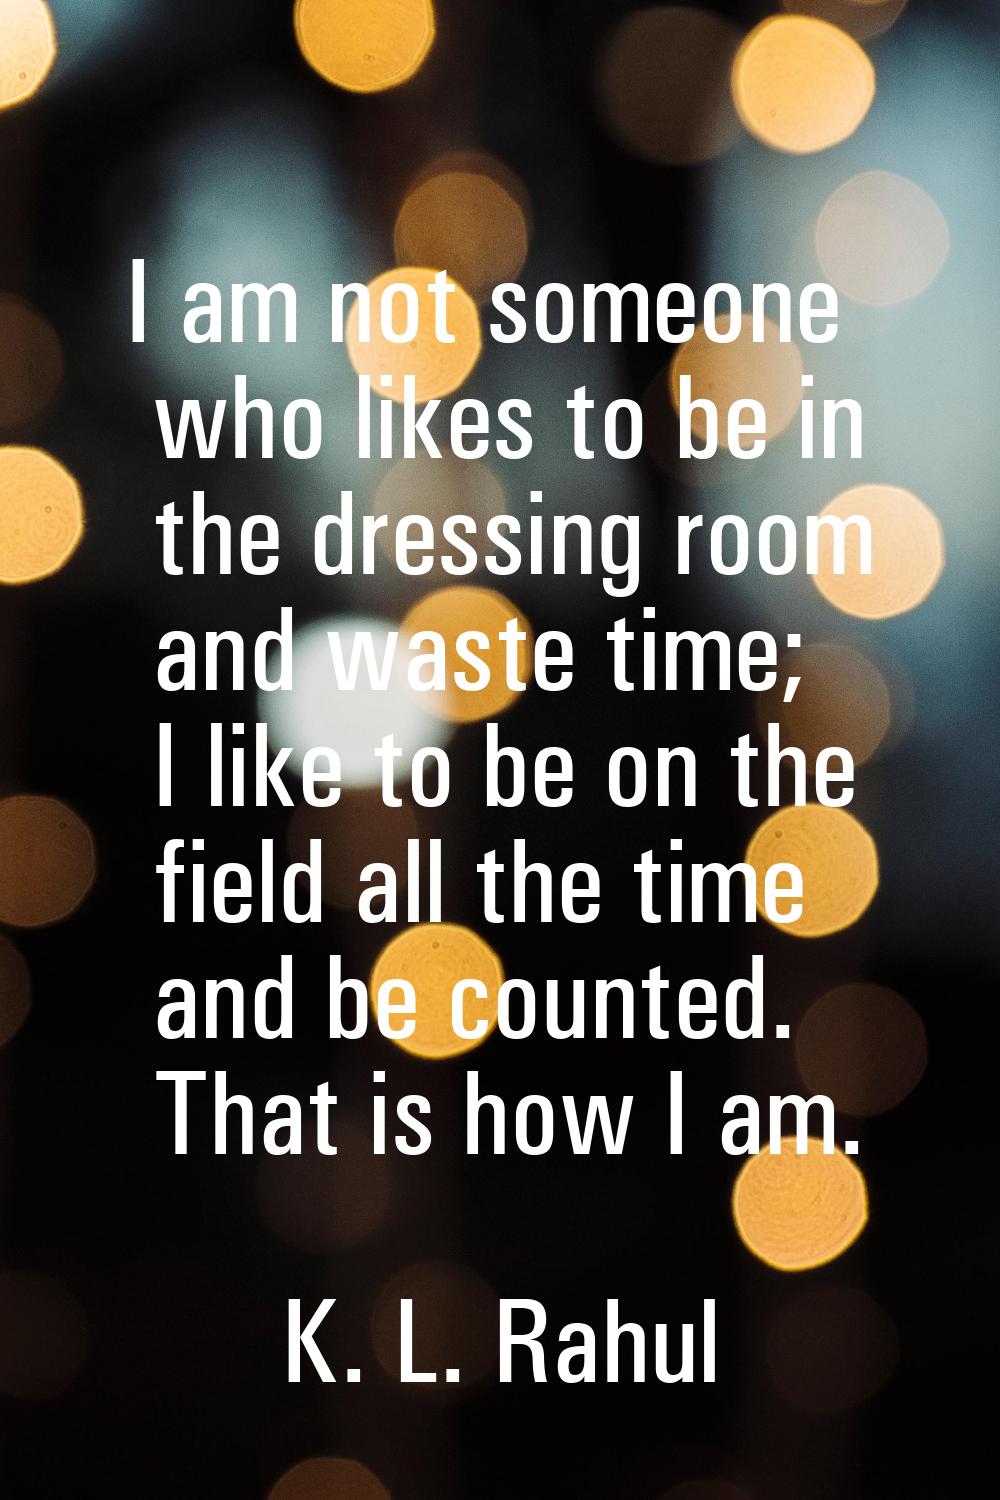 I am not someone who likes to be in the dressing room and waste time; I like to be on the field all